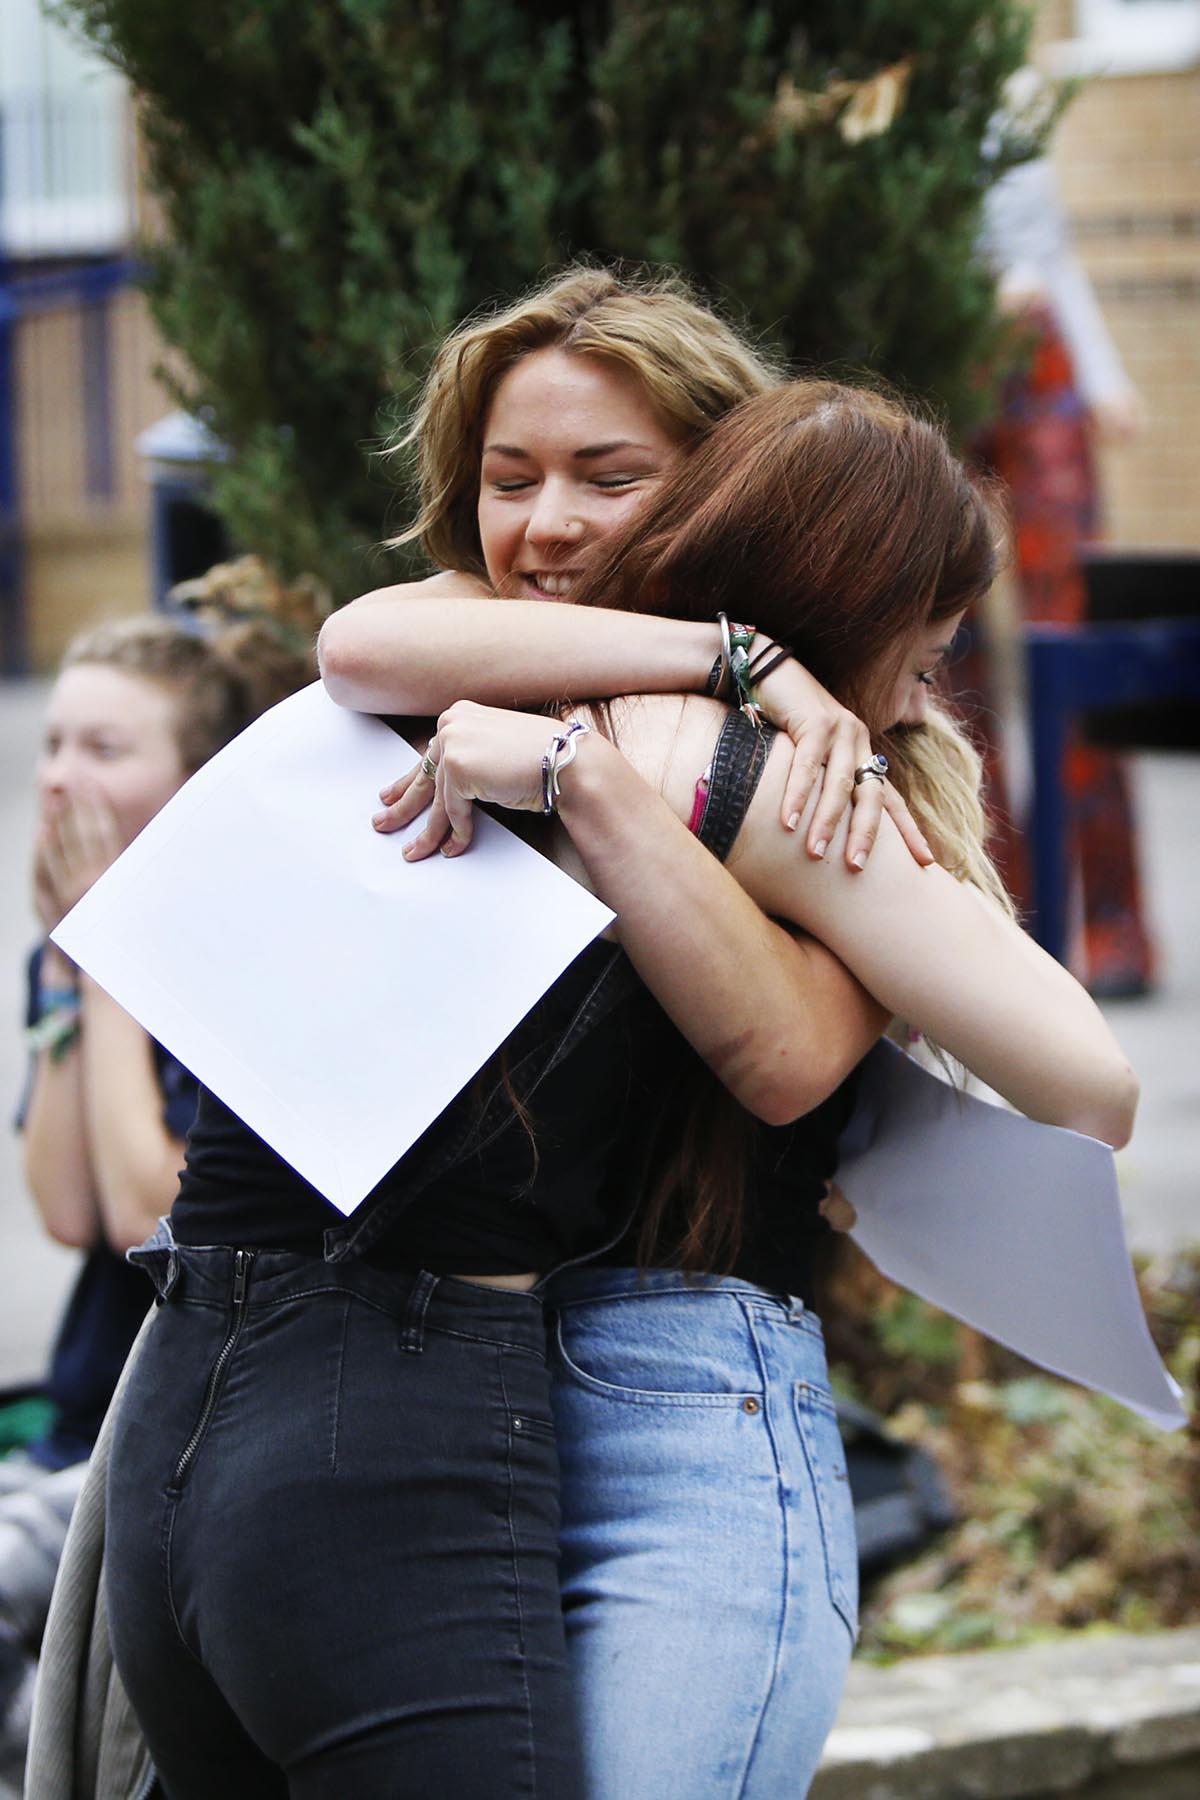 Pictures from around Oxfordshire of student receiving their A Level results